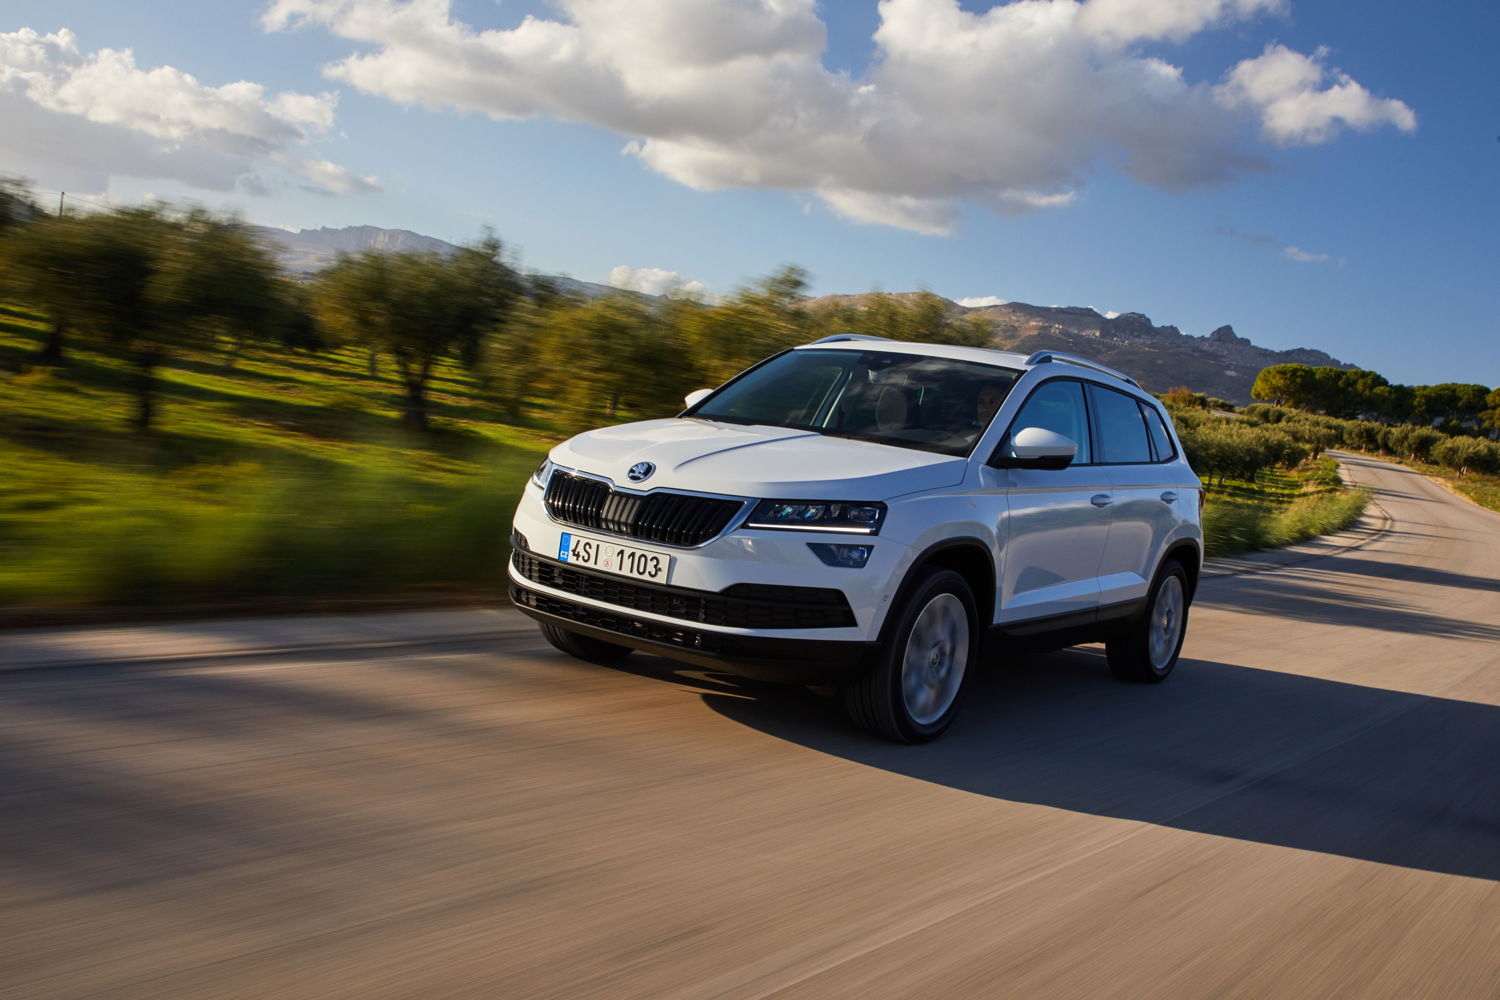 Readers from over 20 European countries had voted the KAROQ into the final of the ‘small SUV’ category. In the end, a jury of experts chose ŠKODA’s newcomer as the winner after a number of challenging test drives.